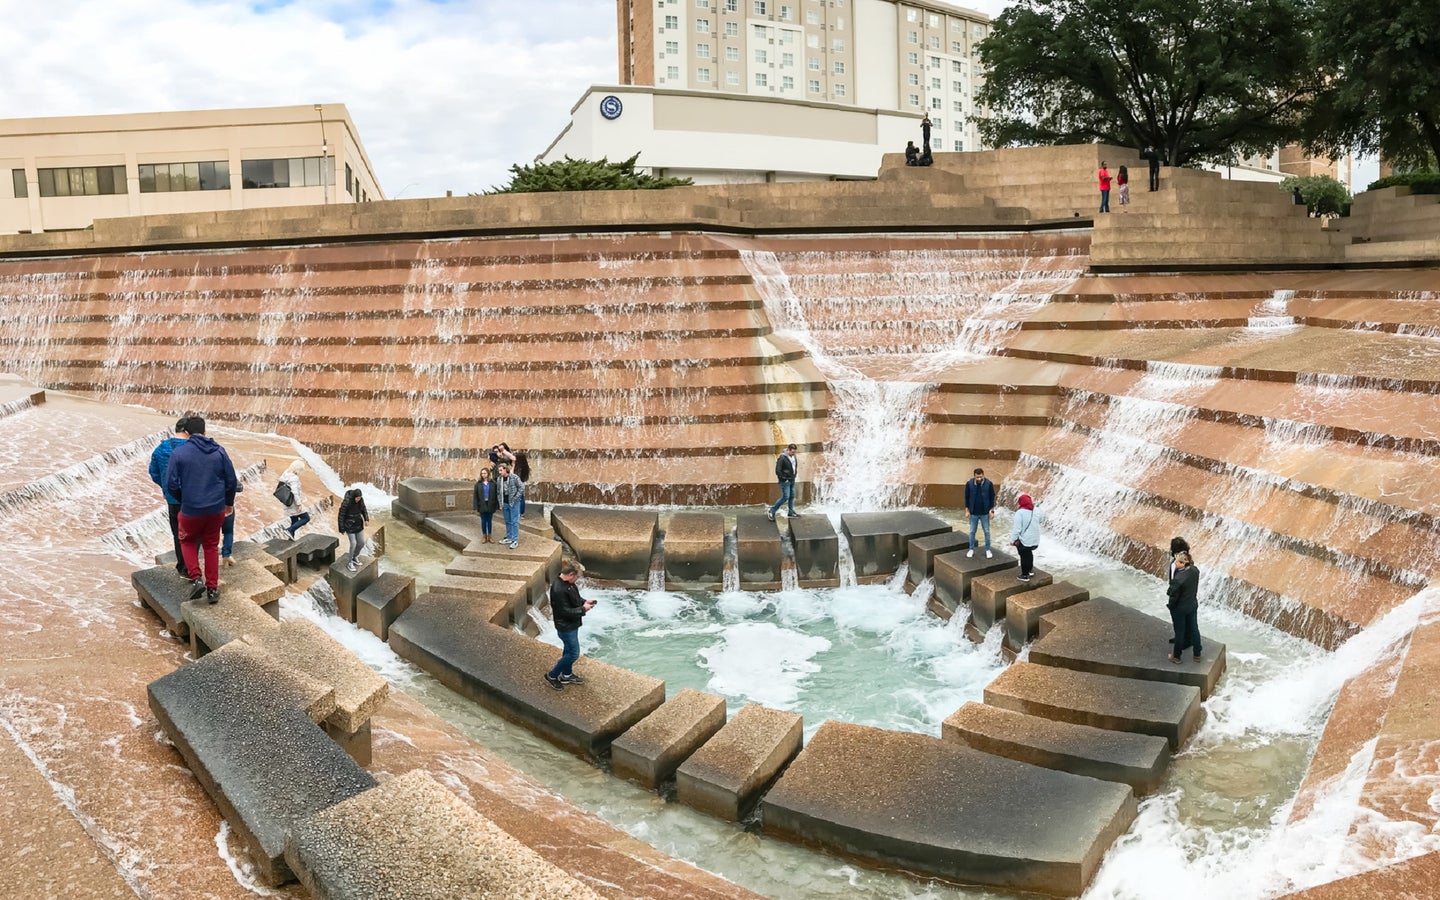 Dallas-Forth Worth water gardens as an example of green infrastructure and walkable cities